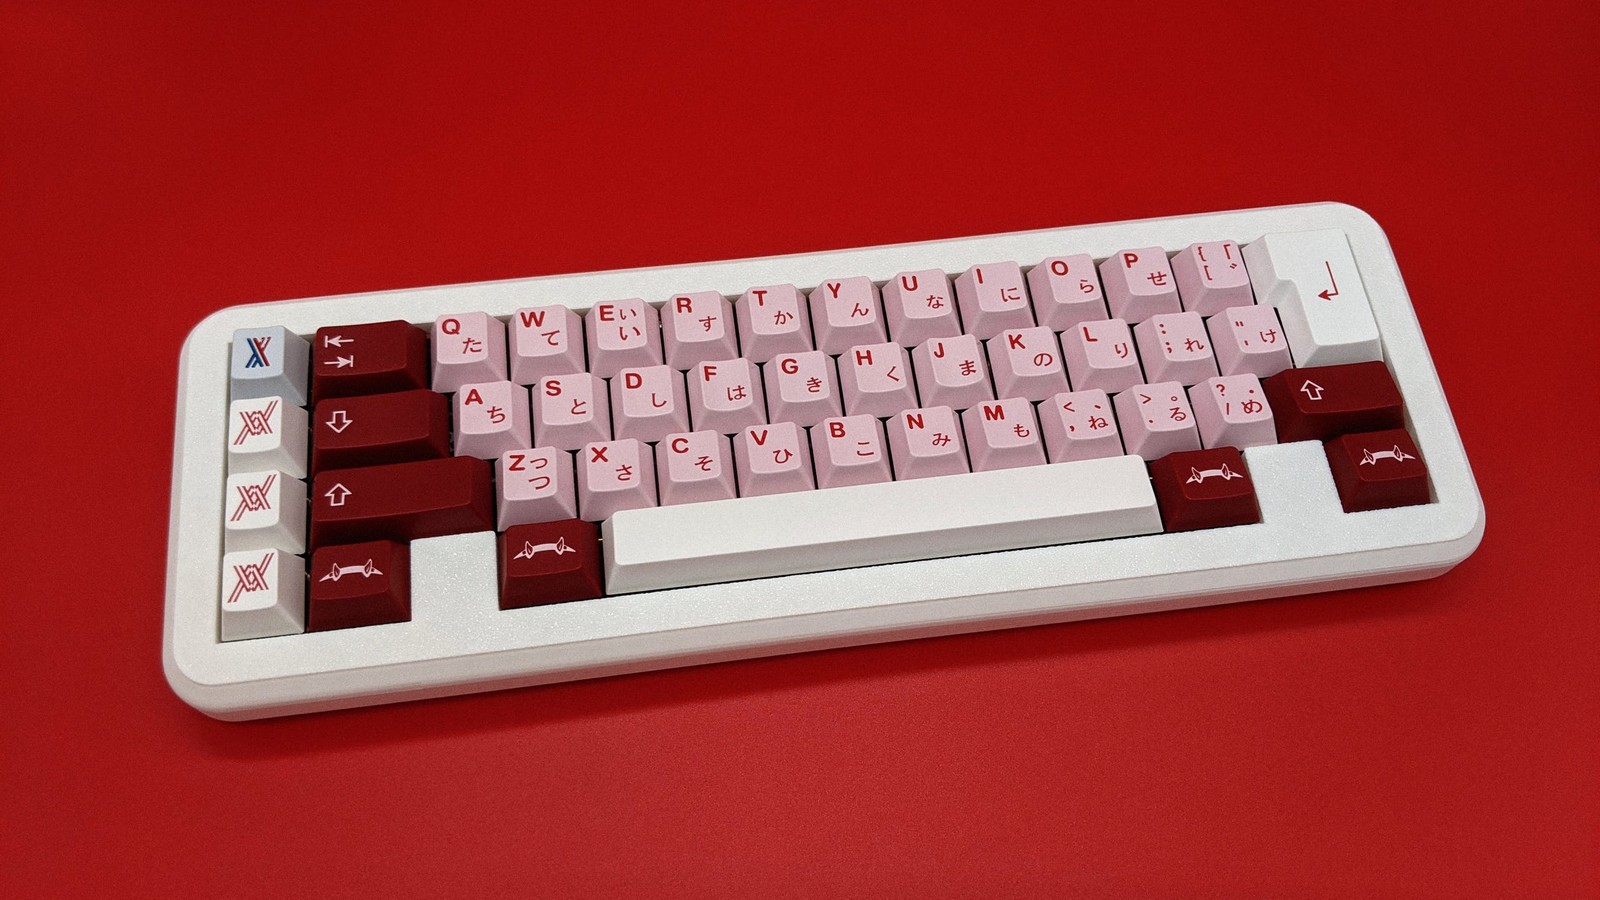 Full shot of GMK Darling on Liminal on a red background